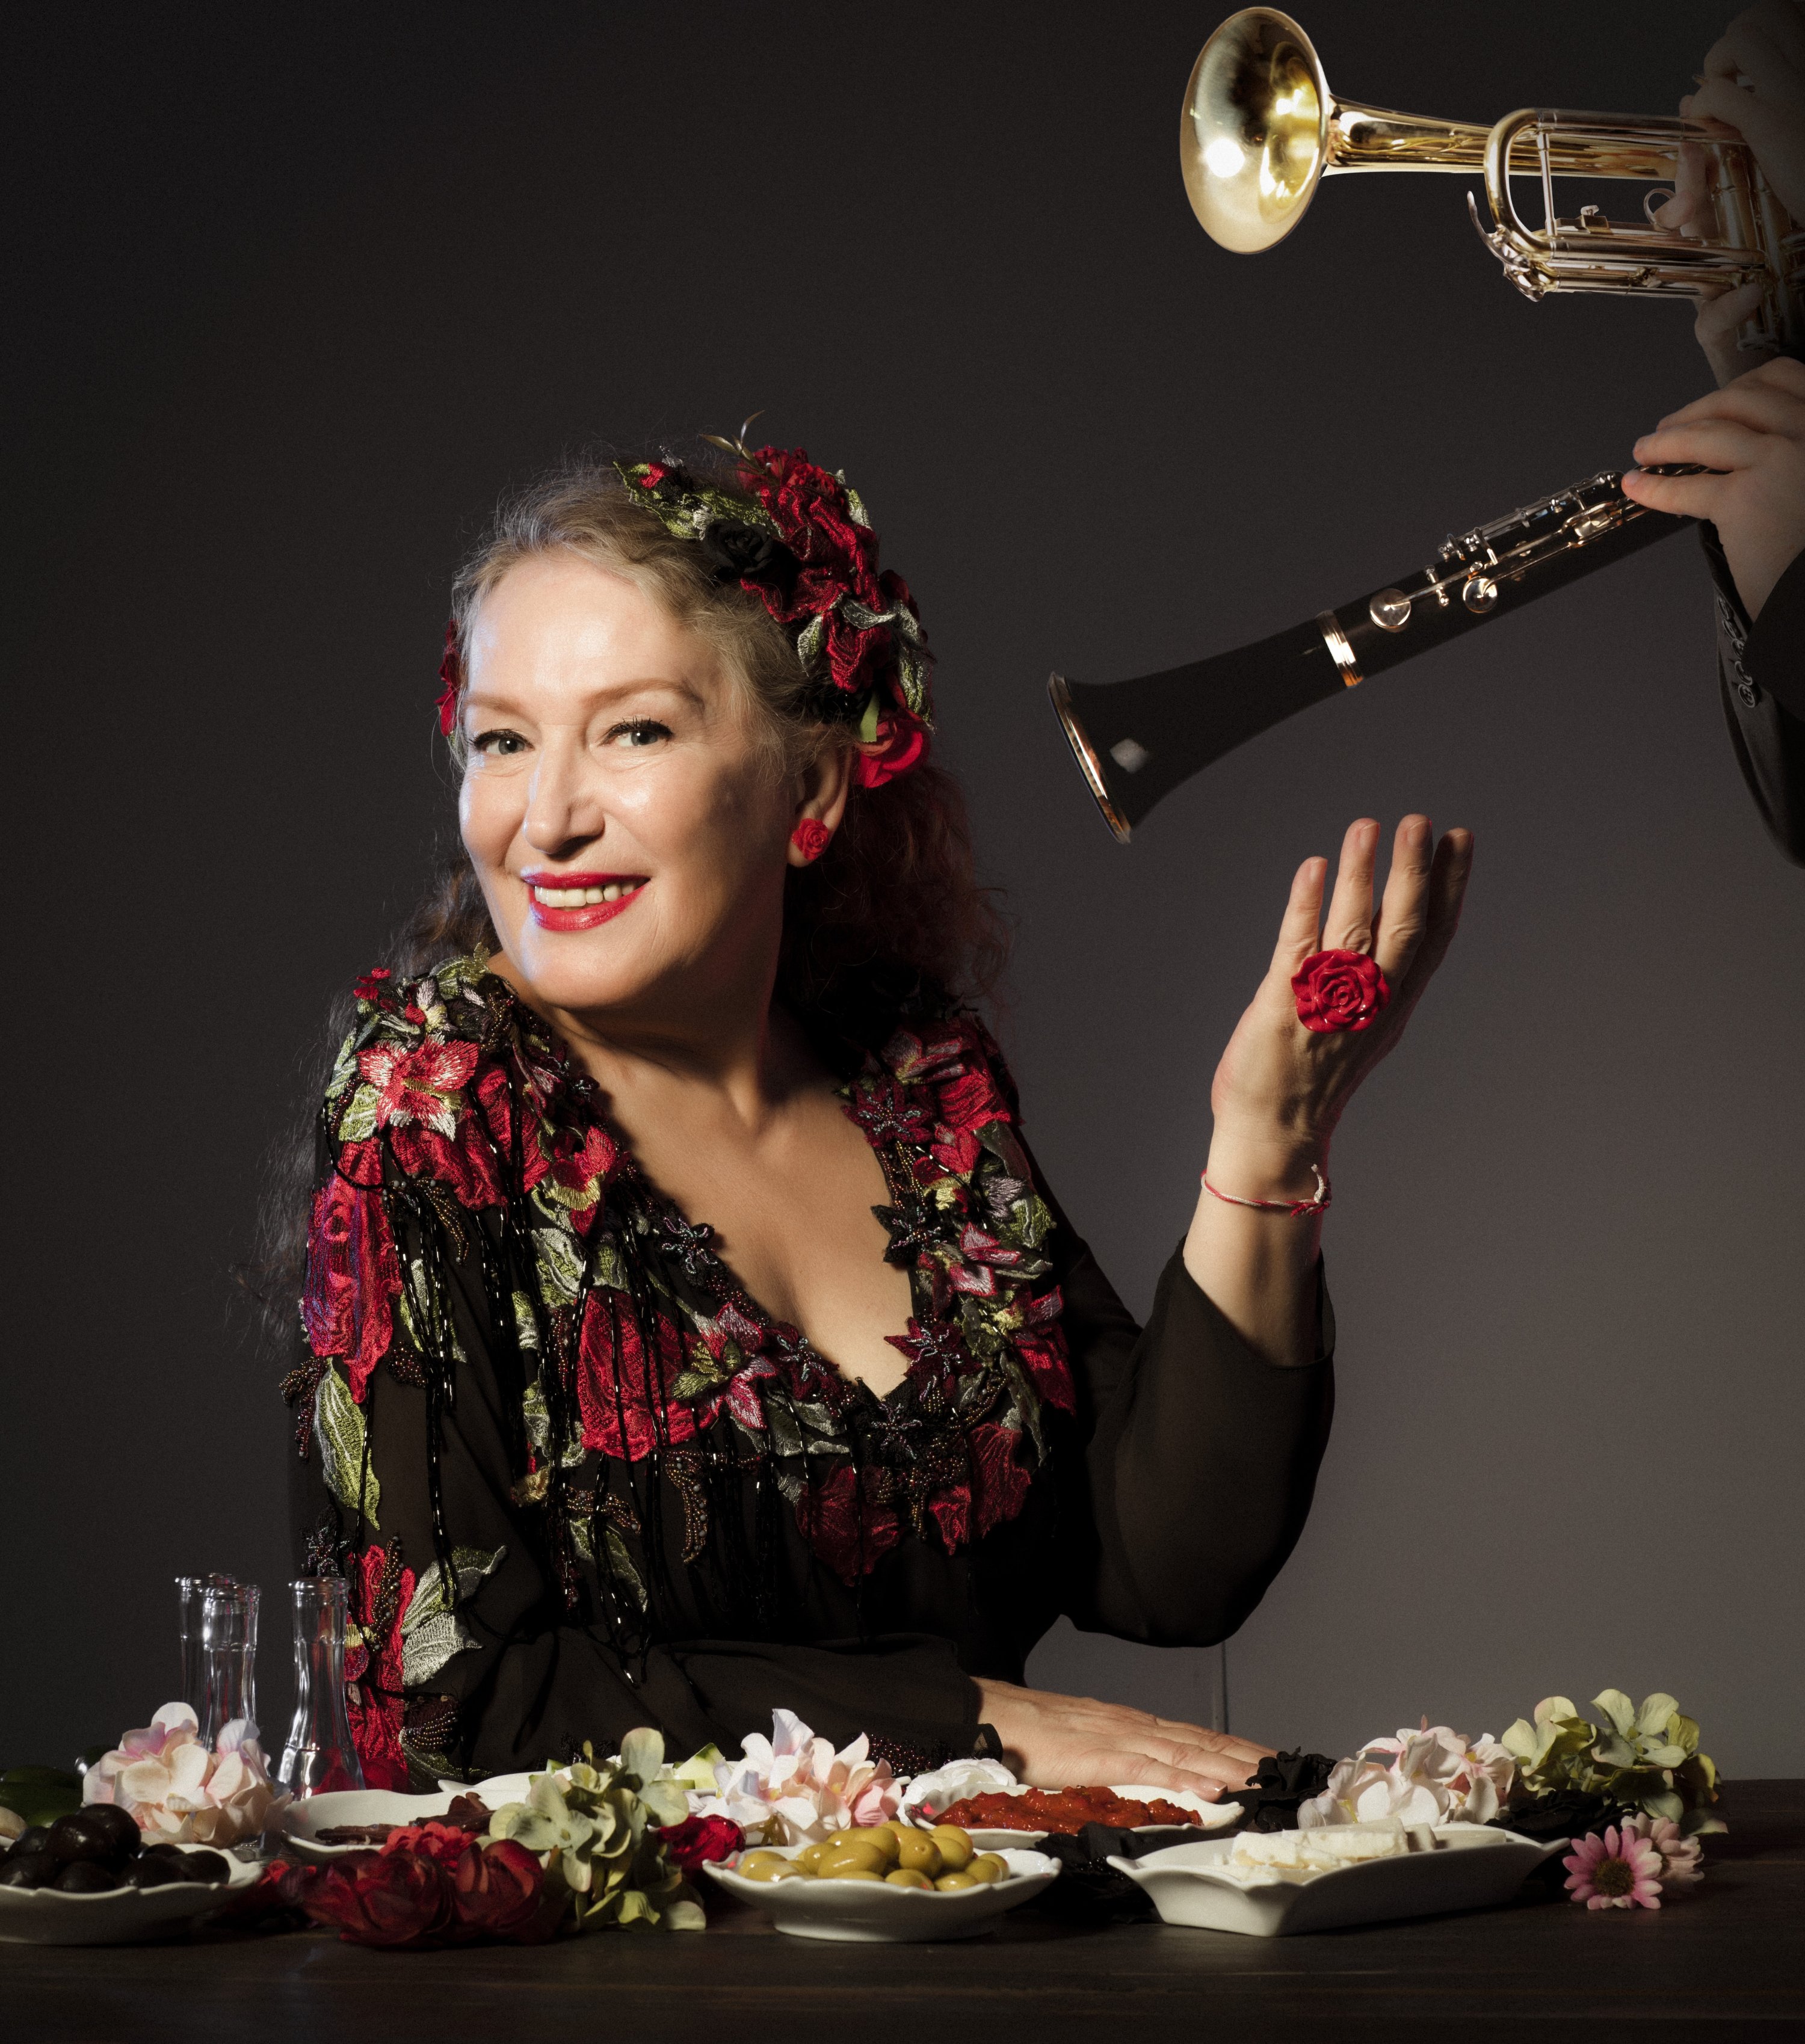 Suzan Kardeş will share the stage with Barcelona Gipsy Balkan Orchestra at the AKM Türk Telekom Opera House as part of the Beyoğlu Culture Road Festival.